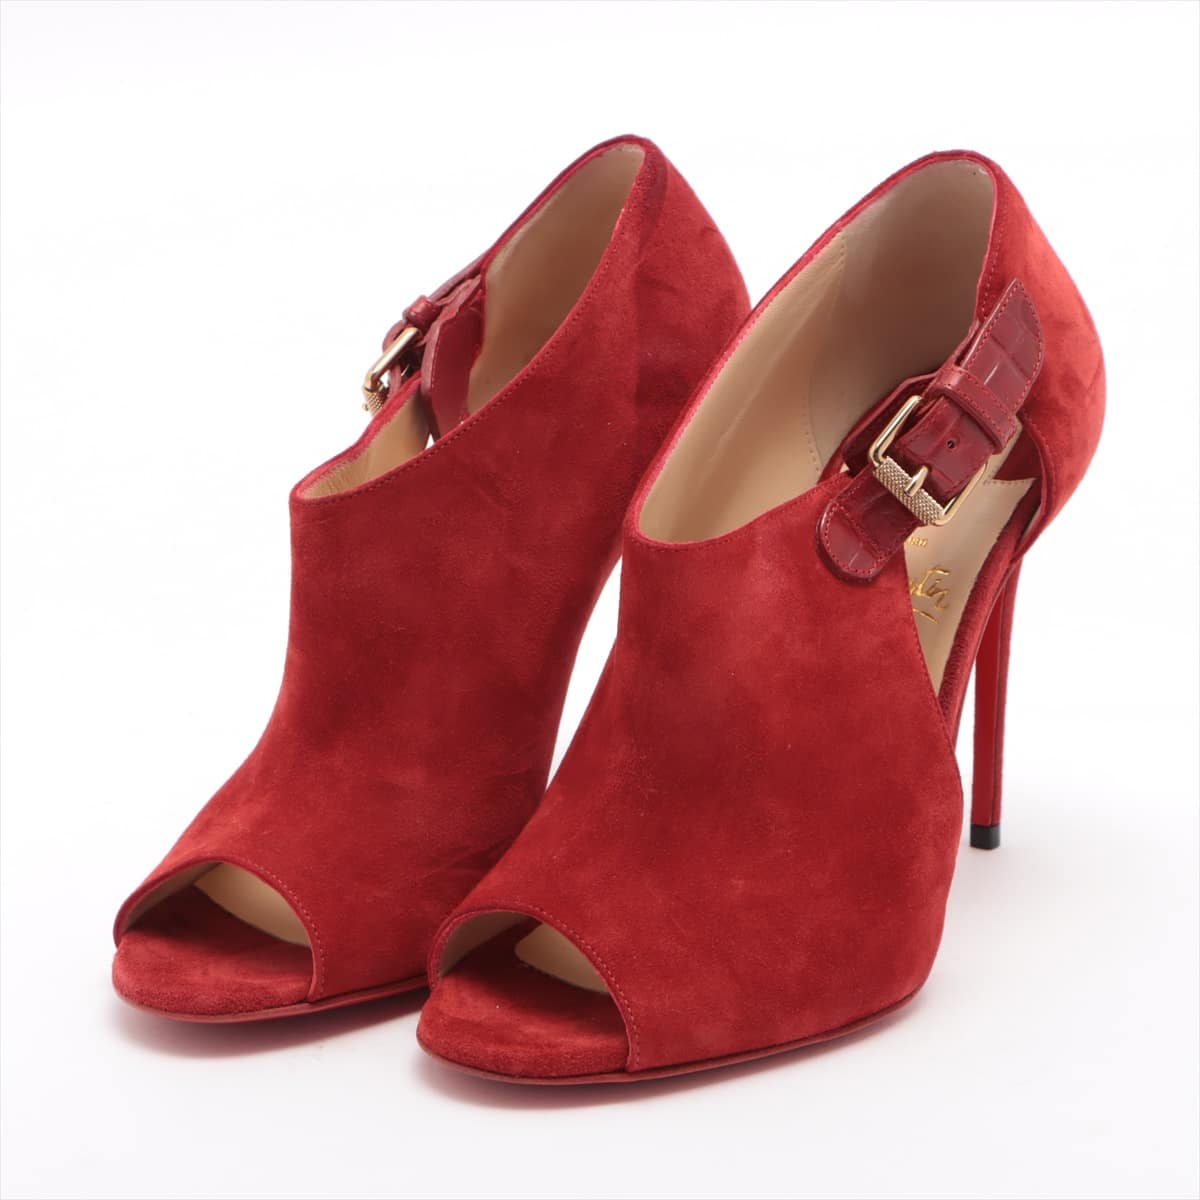 Christian Louboutin Suede Booties 35 1/2 Ladies' Red Open toe